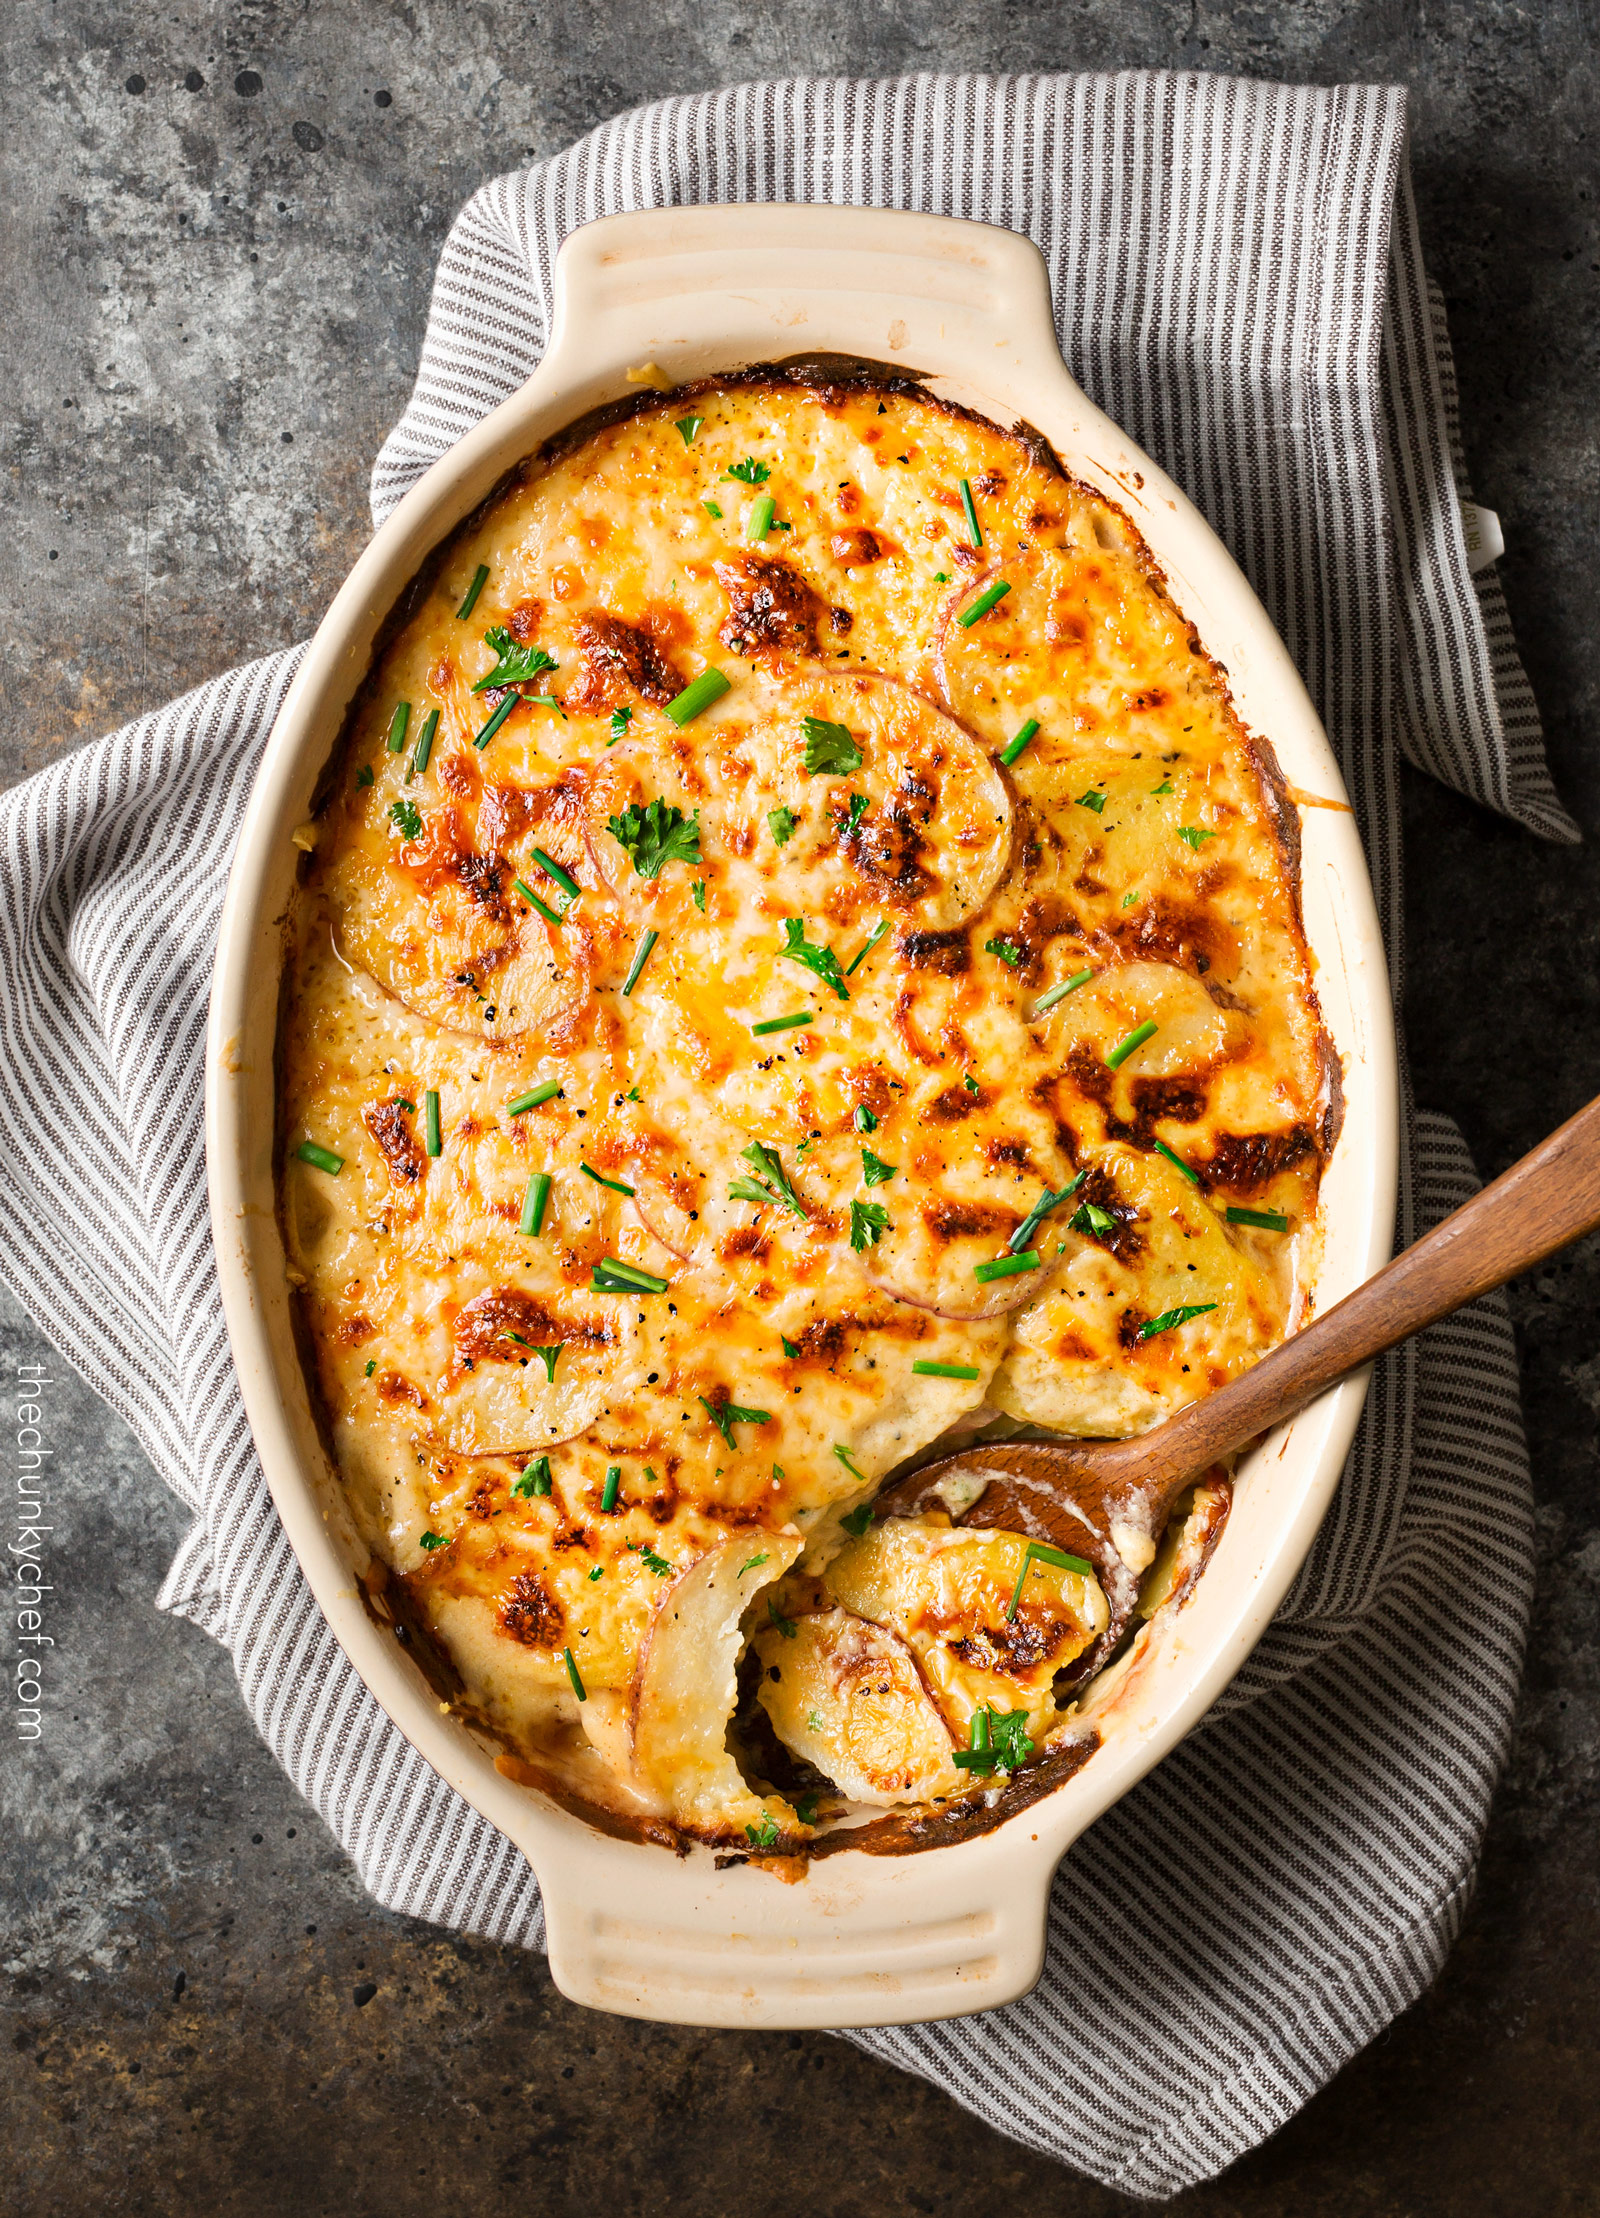 Garlic Parmesan Cheesy Scalloped Potatoes | Velvety soft and tender layers of two kinds of potatoes, smothered in a rich 3 cheese garlic sauce, then topped with extra cheese for a perfectly crispy top! It's the scalloped potato dish you've been dreaming of your entire life! | http://thechunkychef.com